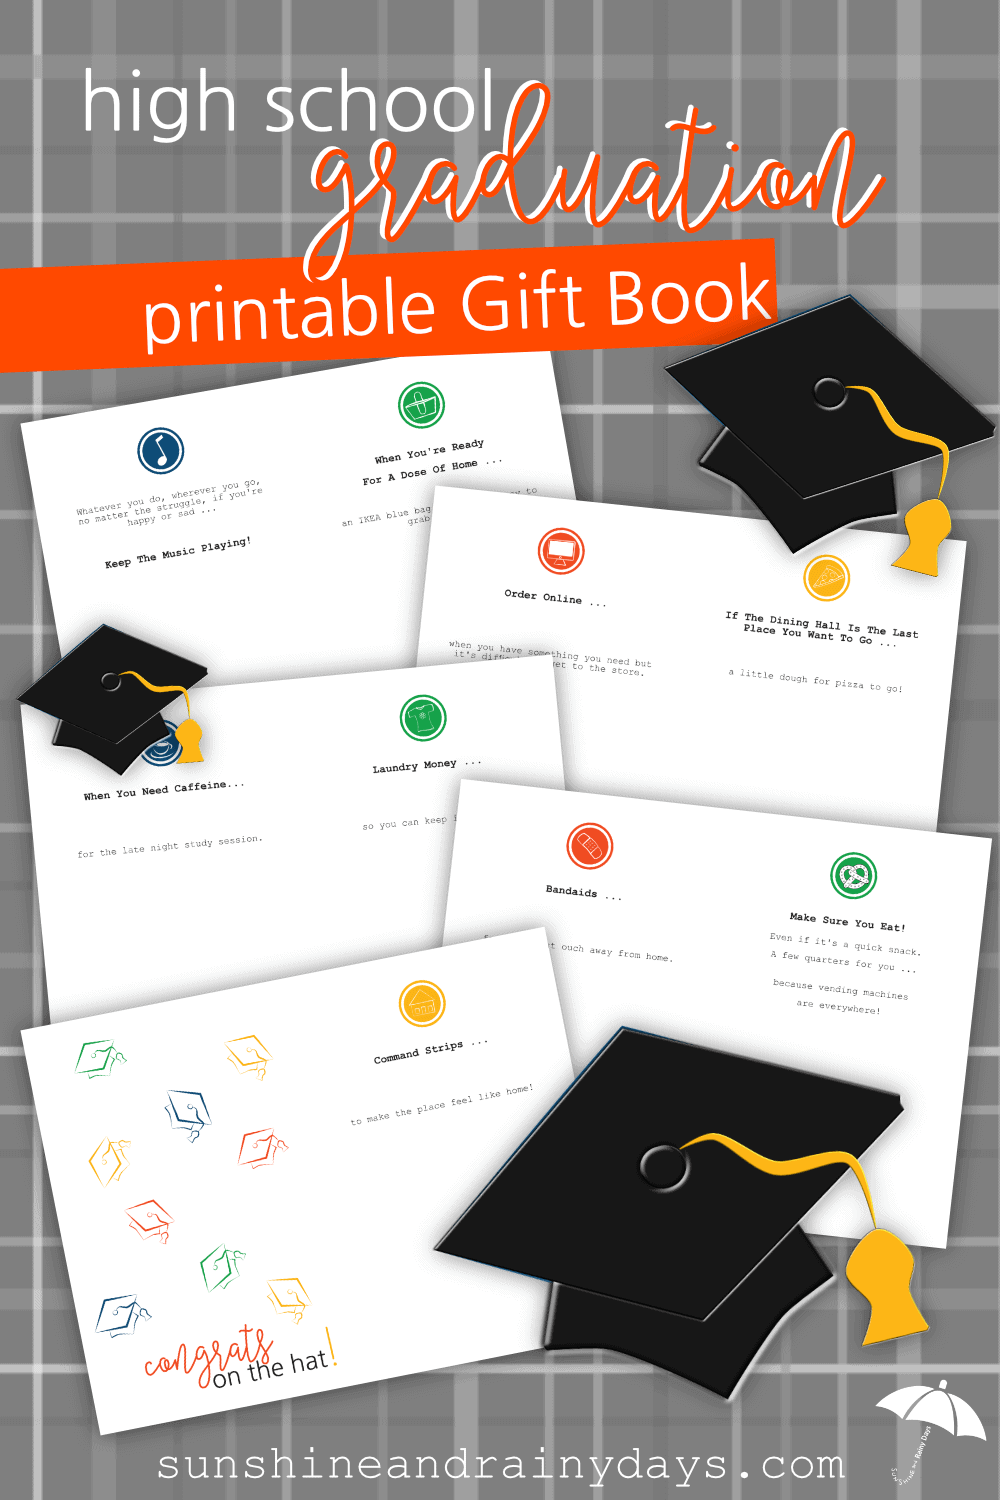 Have you received Graduation Announcements in the mail or plan to attend a Graduation Party? You know the graduate really just wants money but you hope to get a little creative. We have the answer for you! The High School Graduation Gift Book For College Bound Students is here! It's money with a little bit of FUN thrown in!